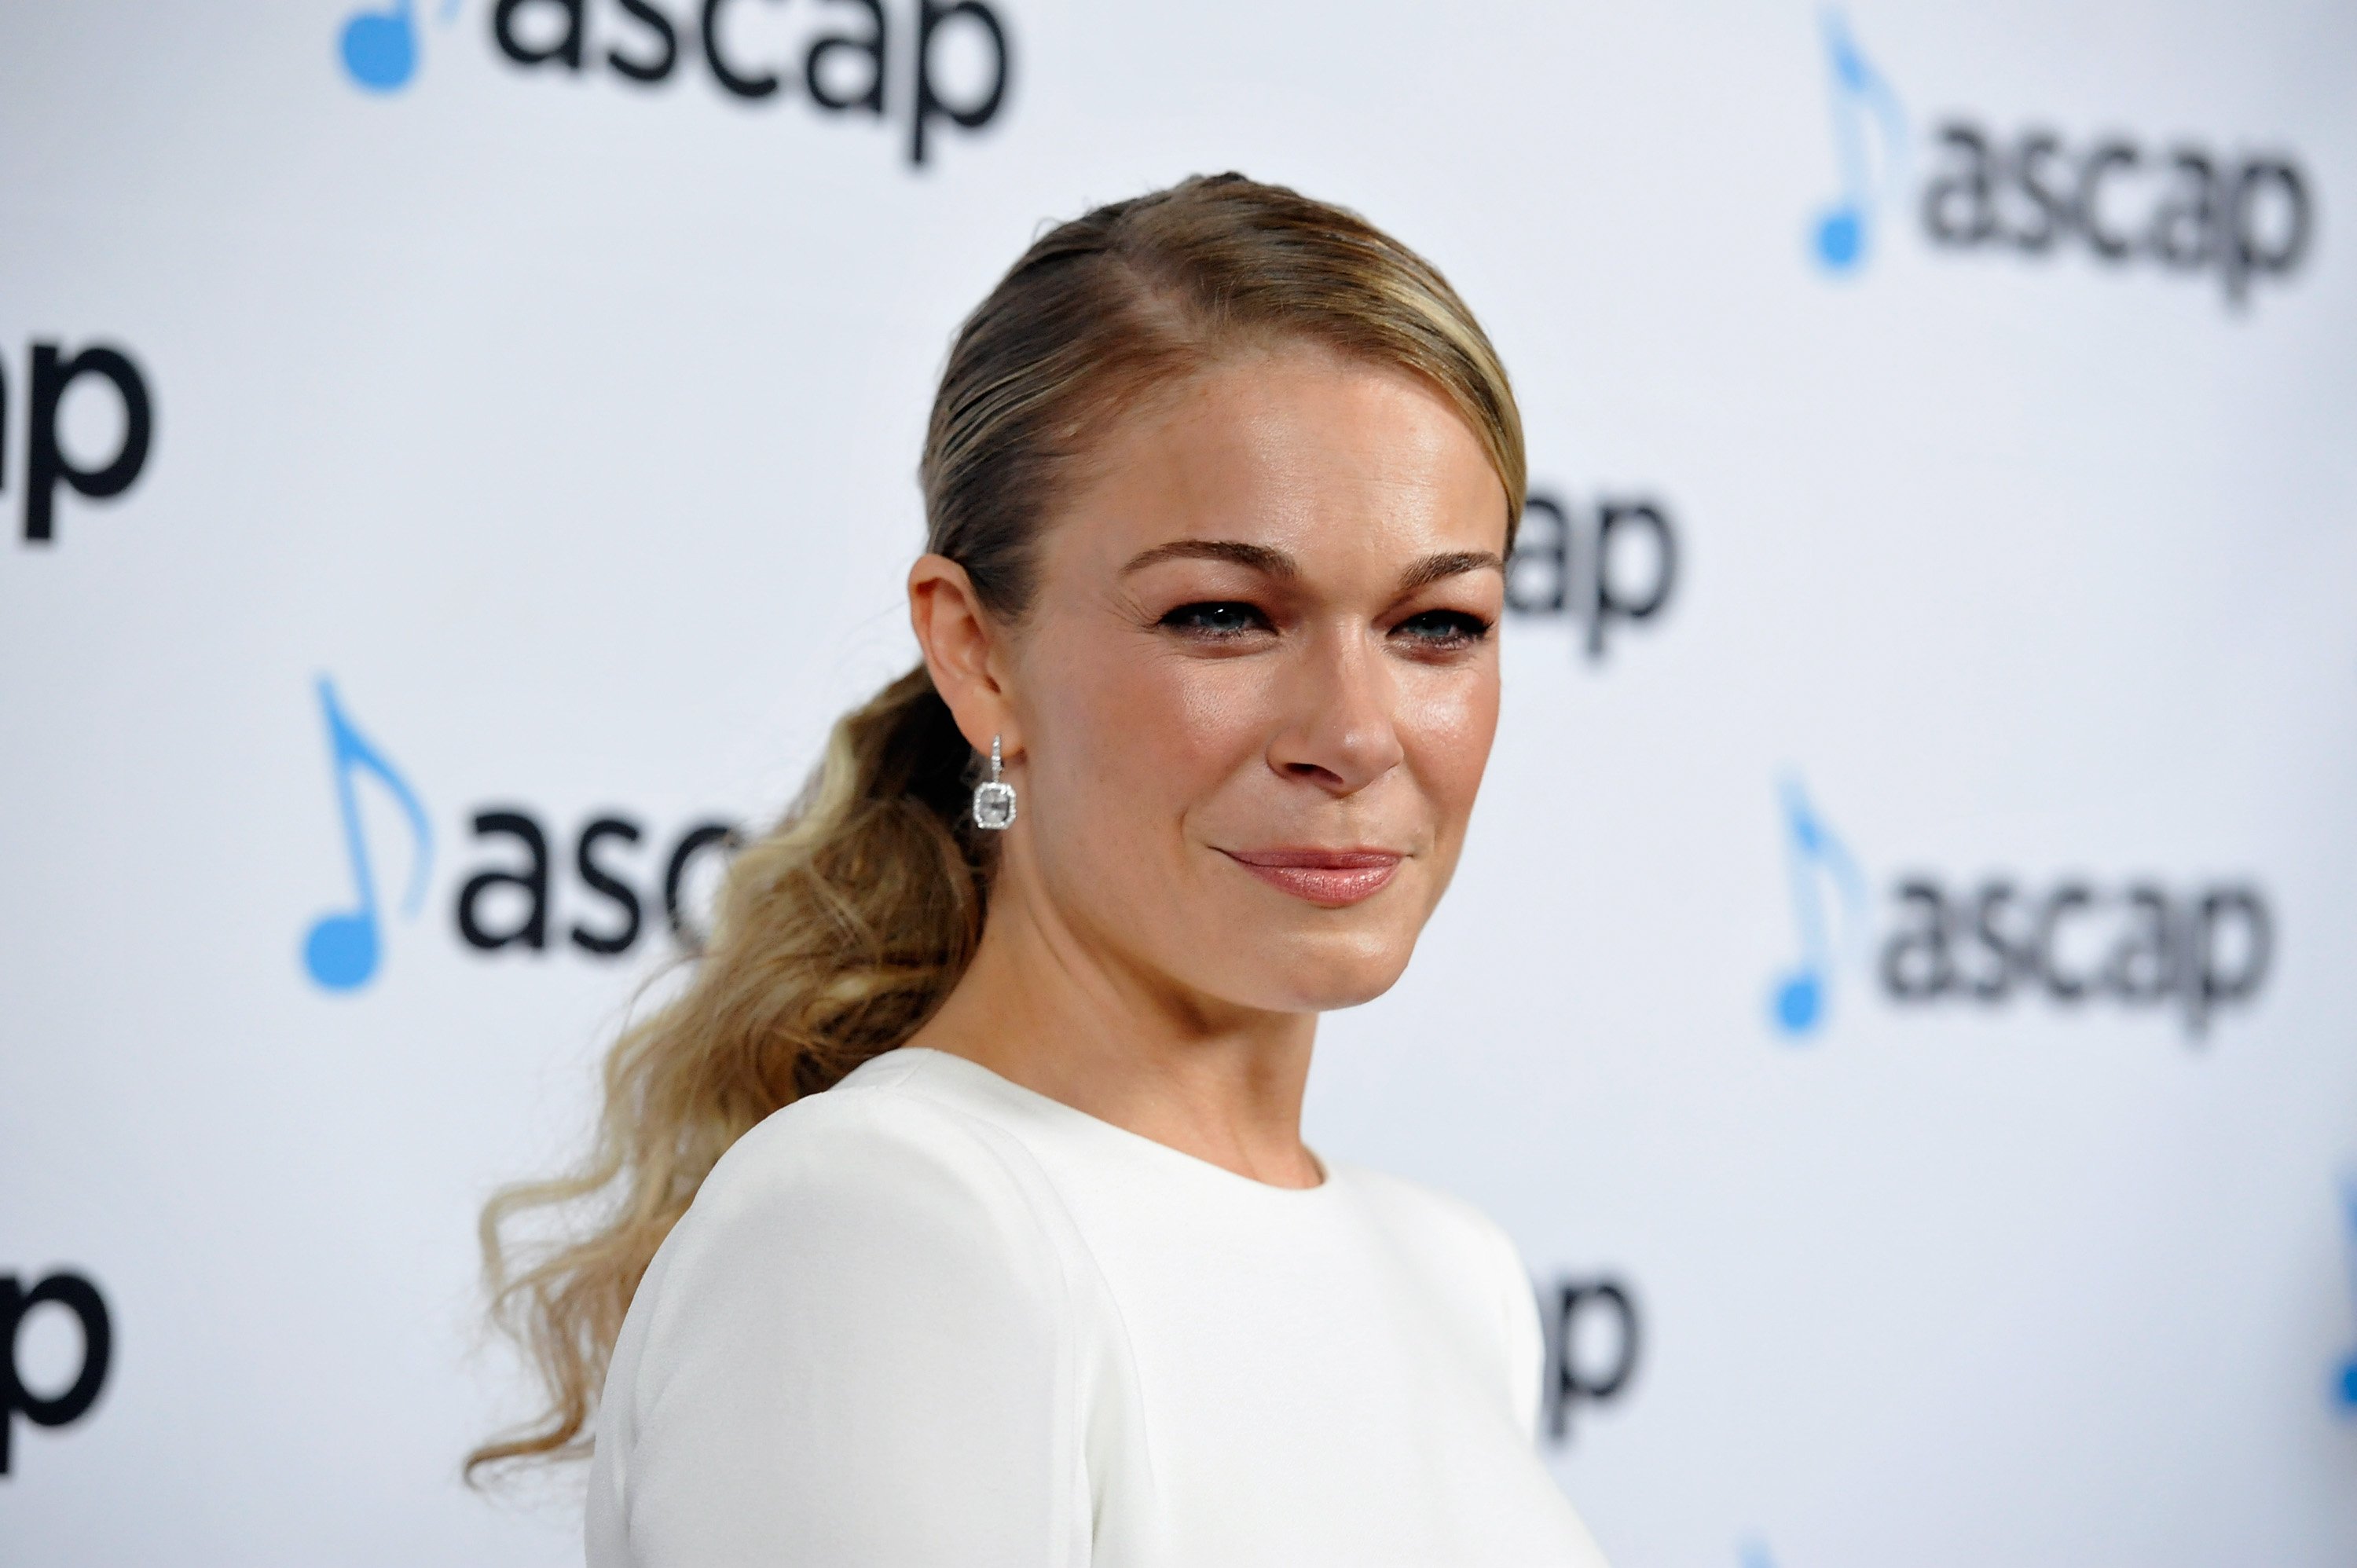 LeAnn Rimes attends the 34th Annual ASCAP Pop Music Awards on May 18, 2017, in Los Angeles. | Source: Getty Images.